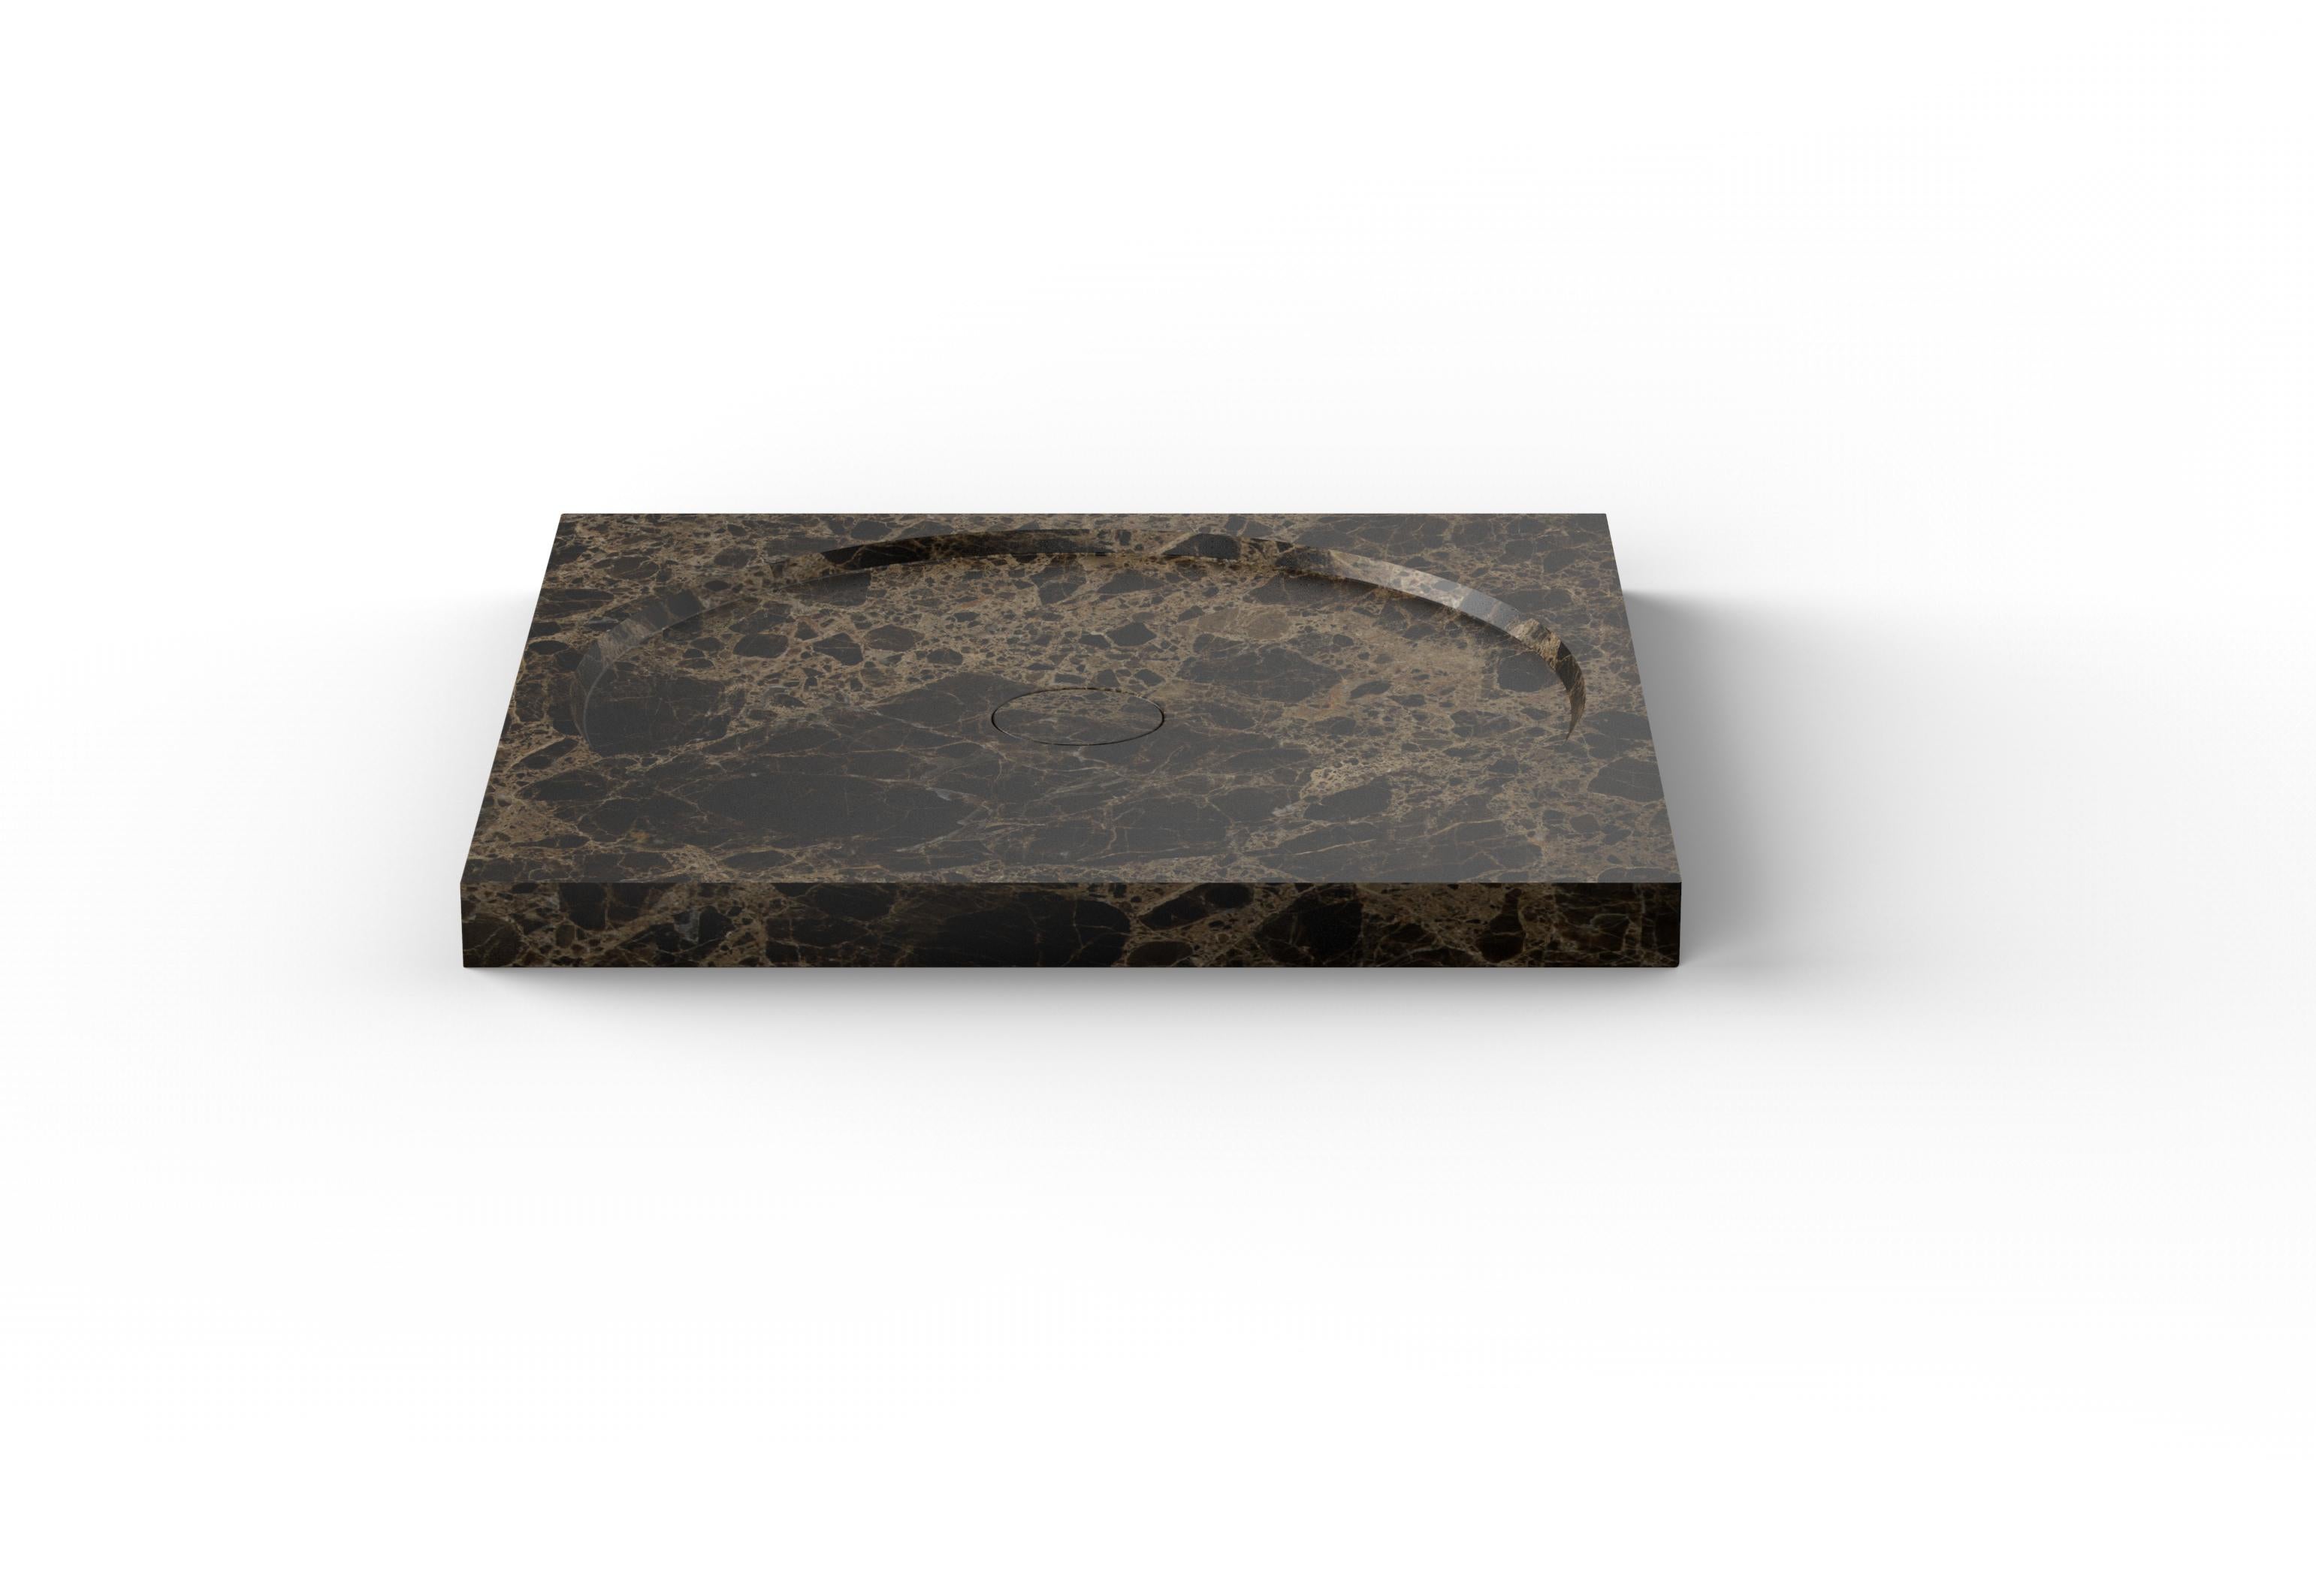 Entity circle shower II by Marmi Serafini
Materials: Emperador brown marble.
Dimensions: D 80 x W 80 x H 6 cm
Available in other marbles.

Can be positioned either in a traditional way by leaning on the floor, or being embedded into the floor.